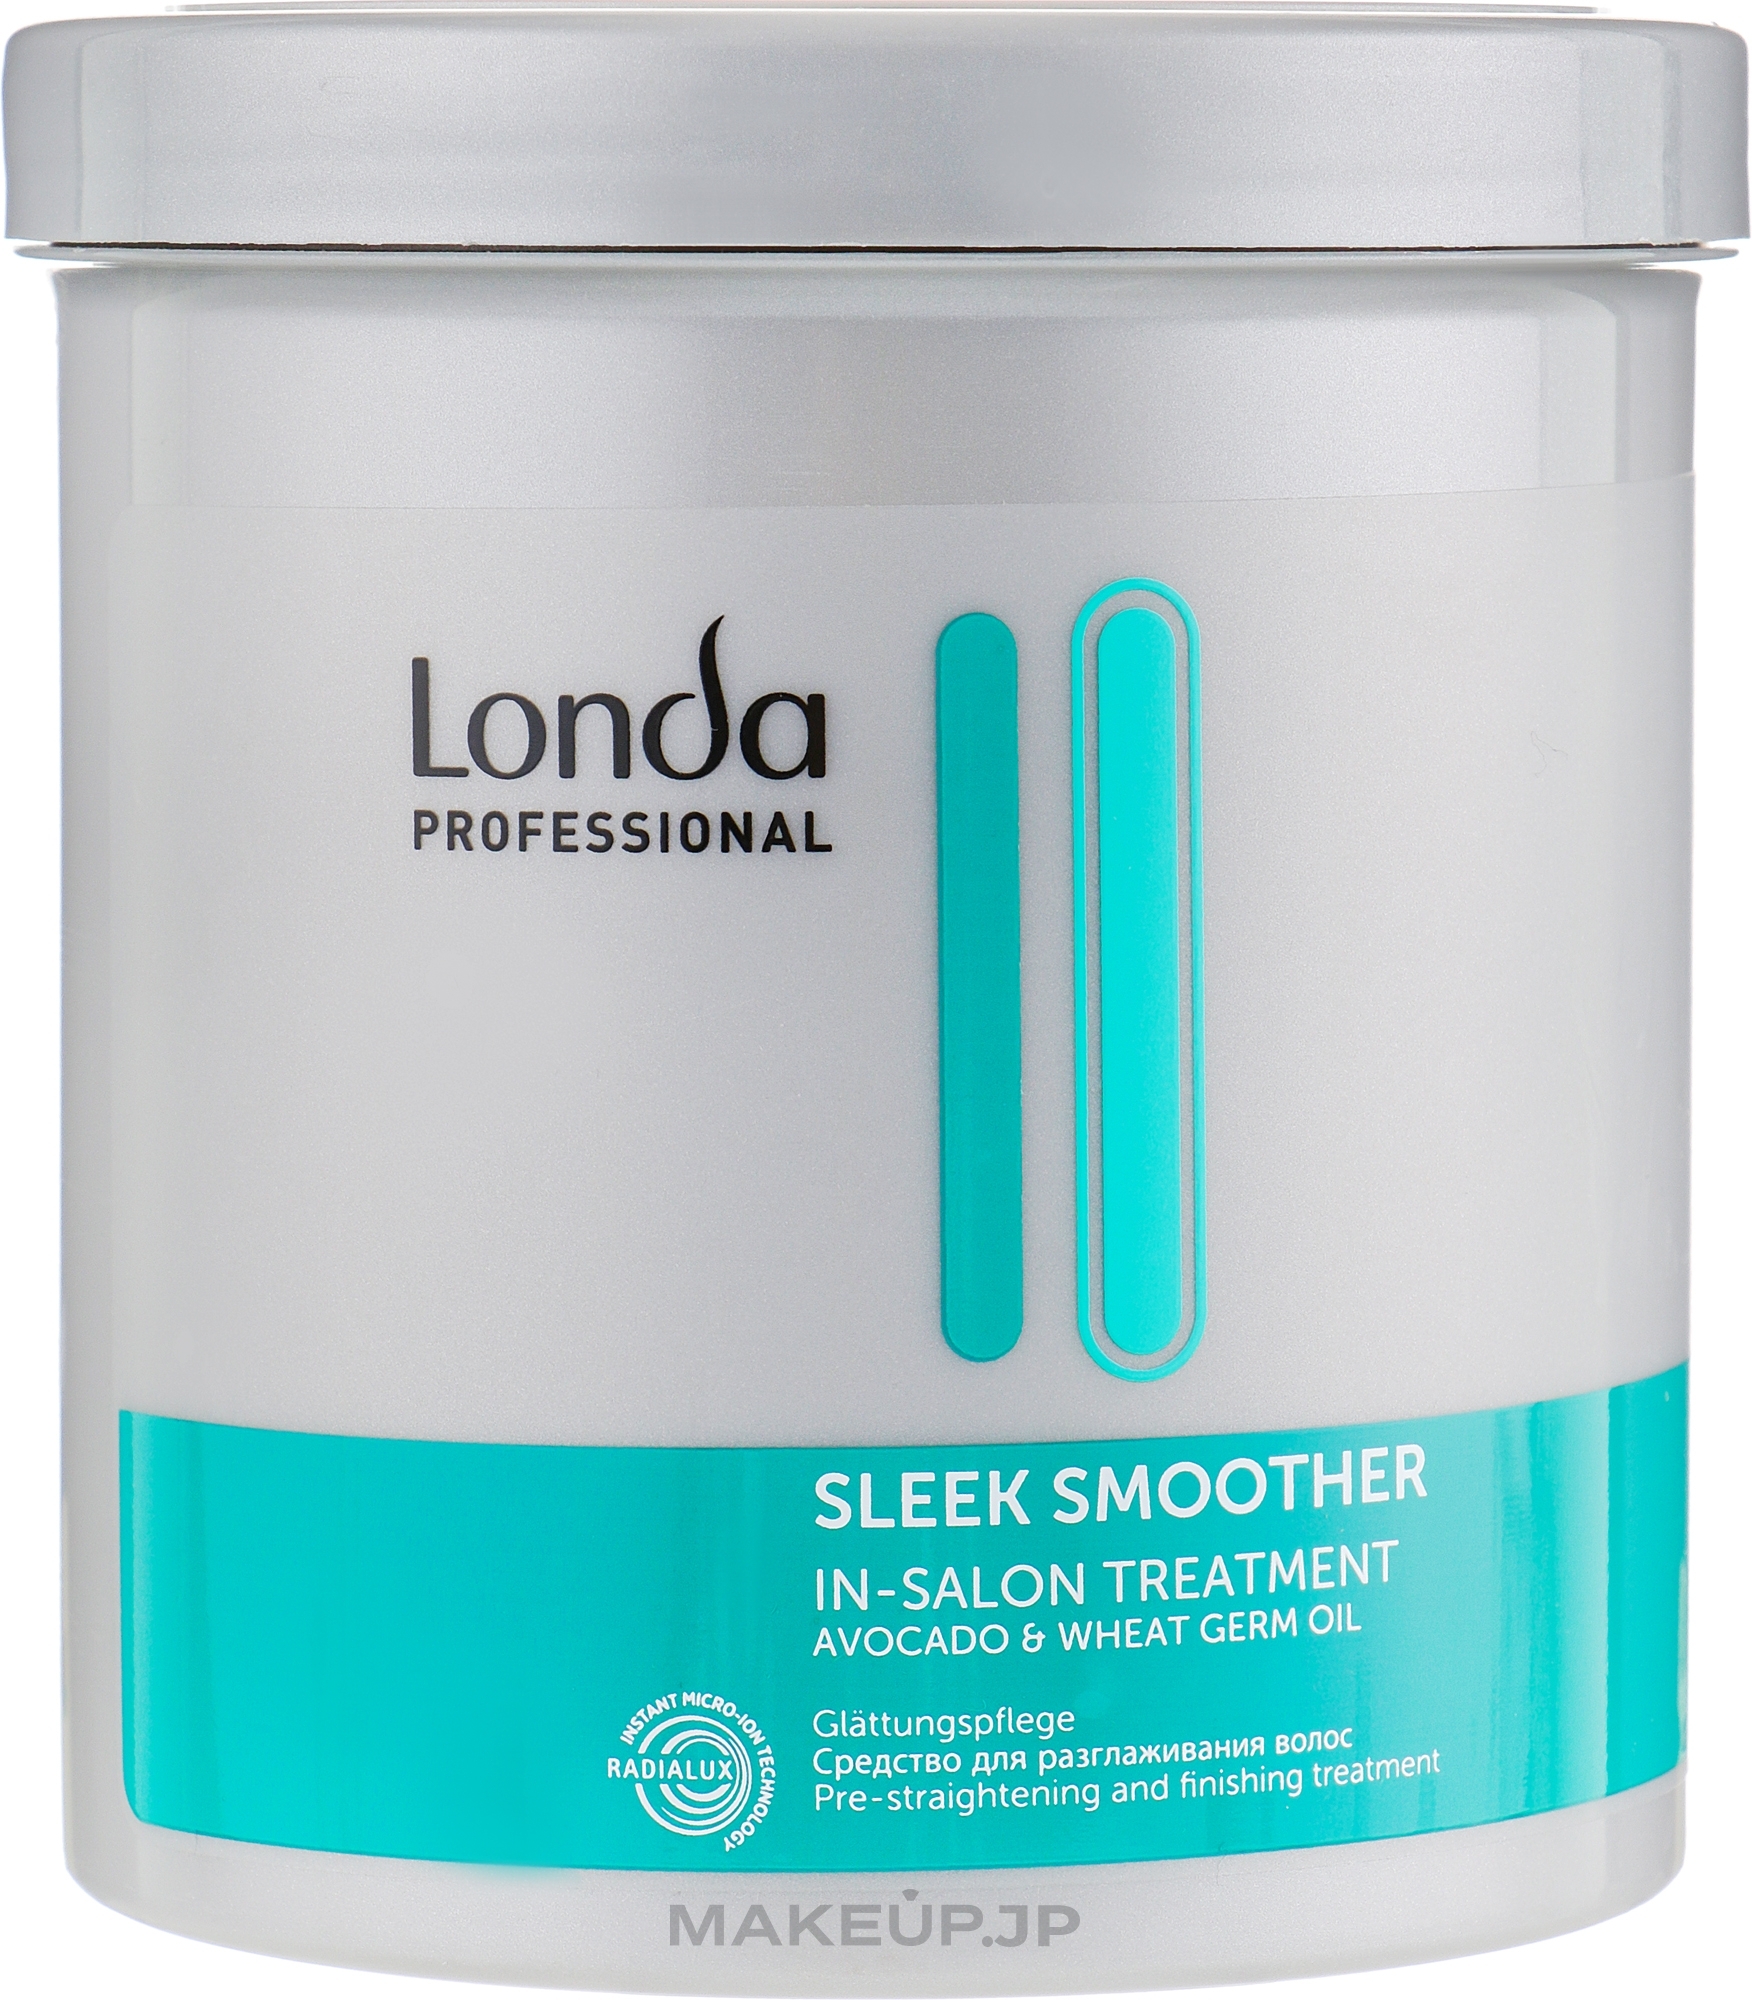 Hair Ends Smoother - Londa Professional Sleek Smoother  — photo 750 ml